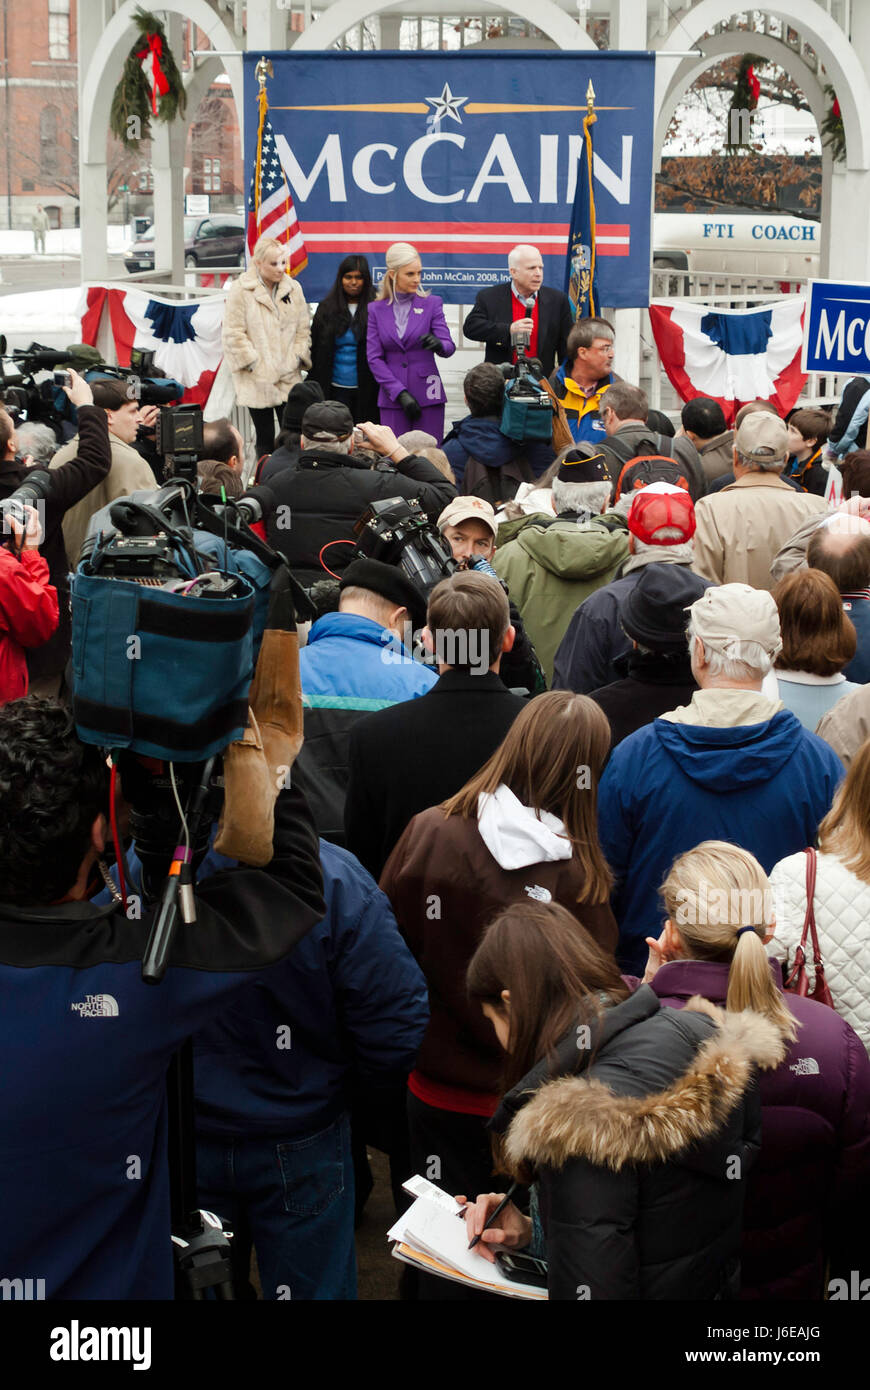 KEENE, NH/US - JANUARY 7, 2008: US Senator John McCain speaks to supporters at an outdoor rally on the final day before the 2008 NH primary. Stock Photo